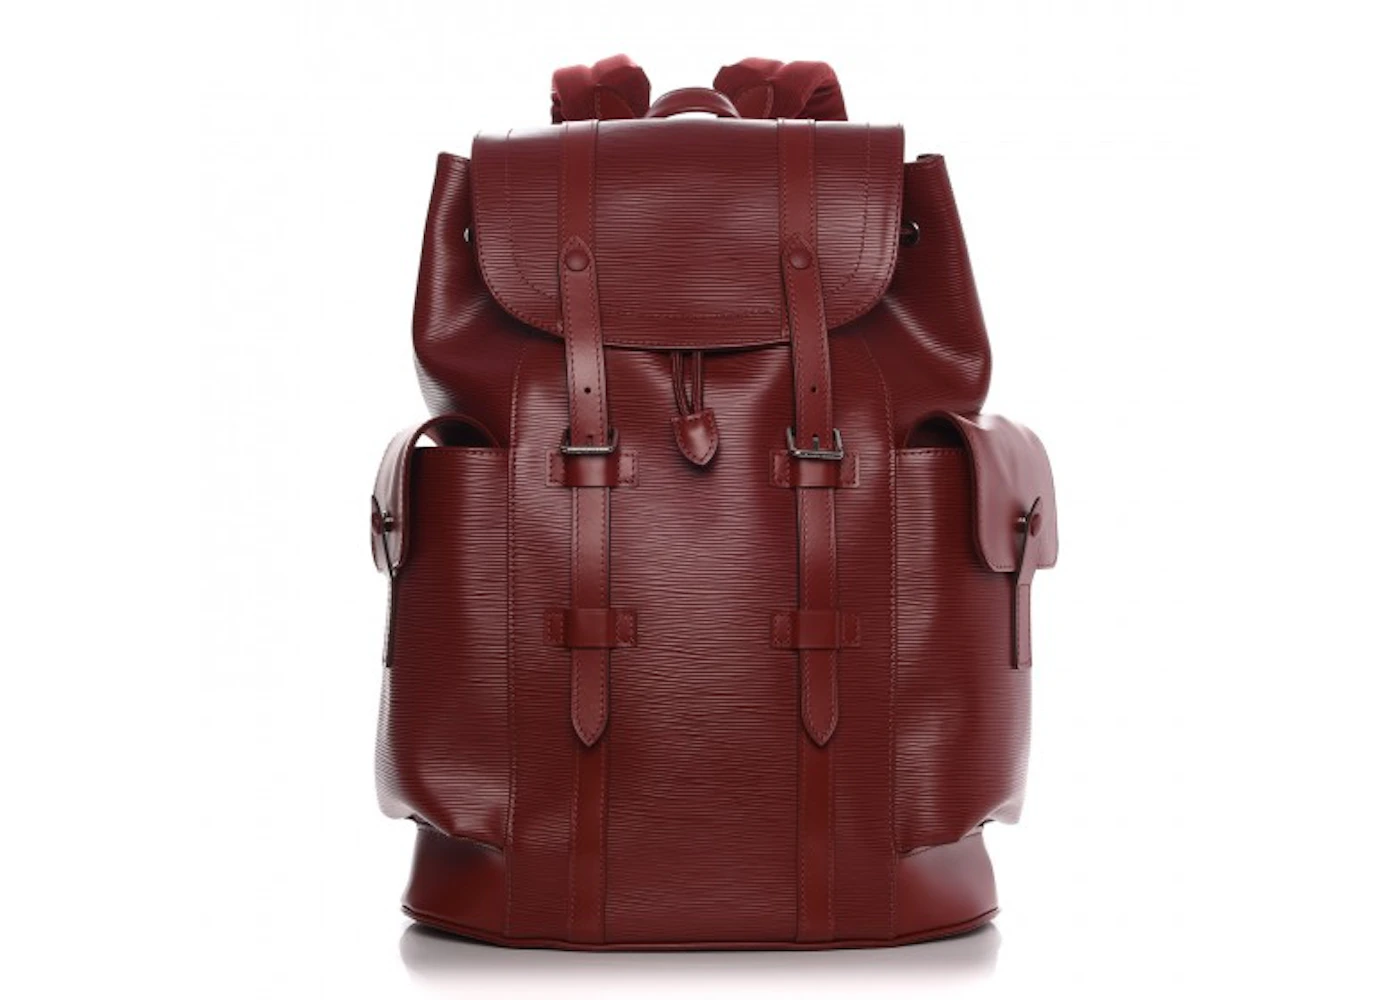 christopher pm louis vuitton backpack